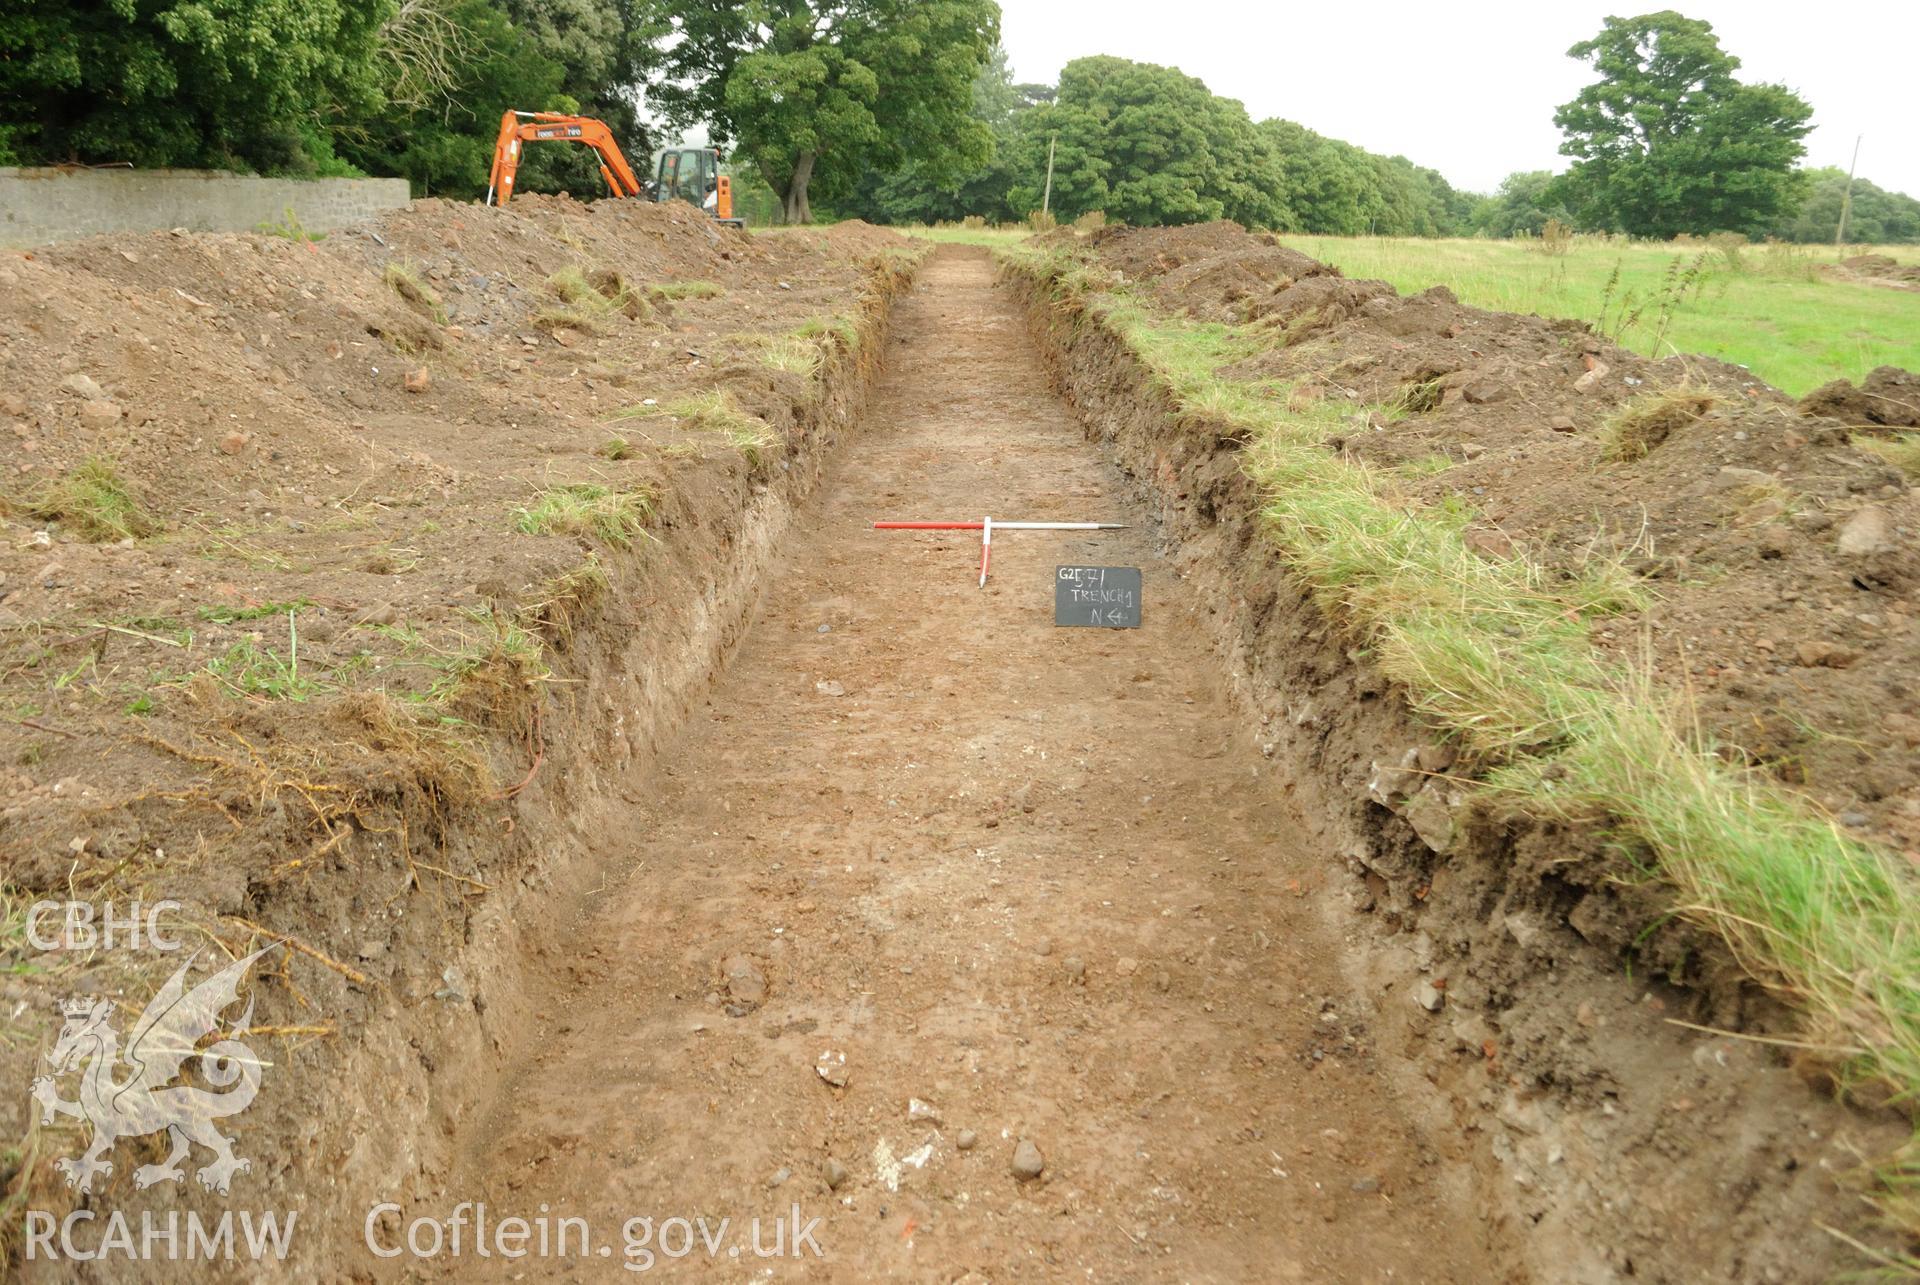 View from the west showing post excavation shot of trench 1; mid-point (western end). Photographed during archaeological evaluation of Kinmel Park, Abergele, conducted by Gwynedd Archaeological Trust on 22nd August 2018. Project no. 2571.